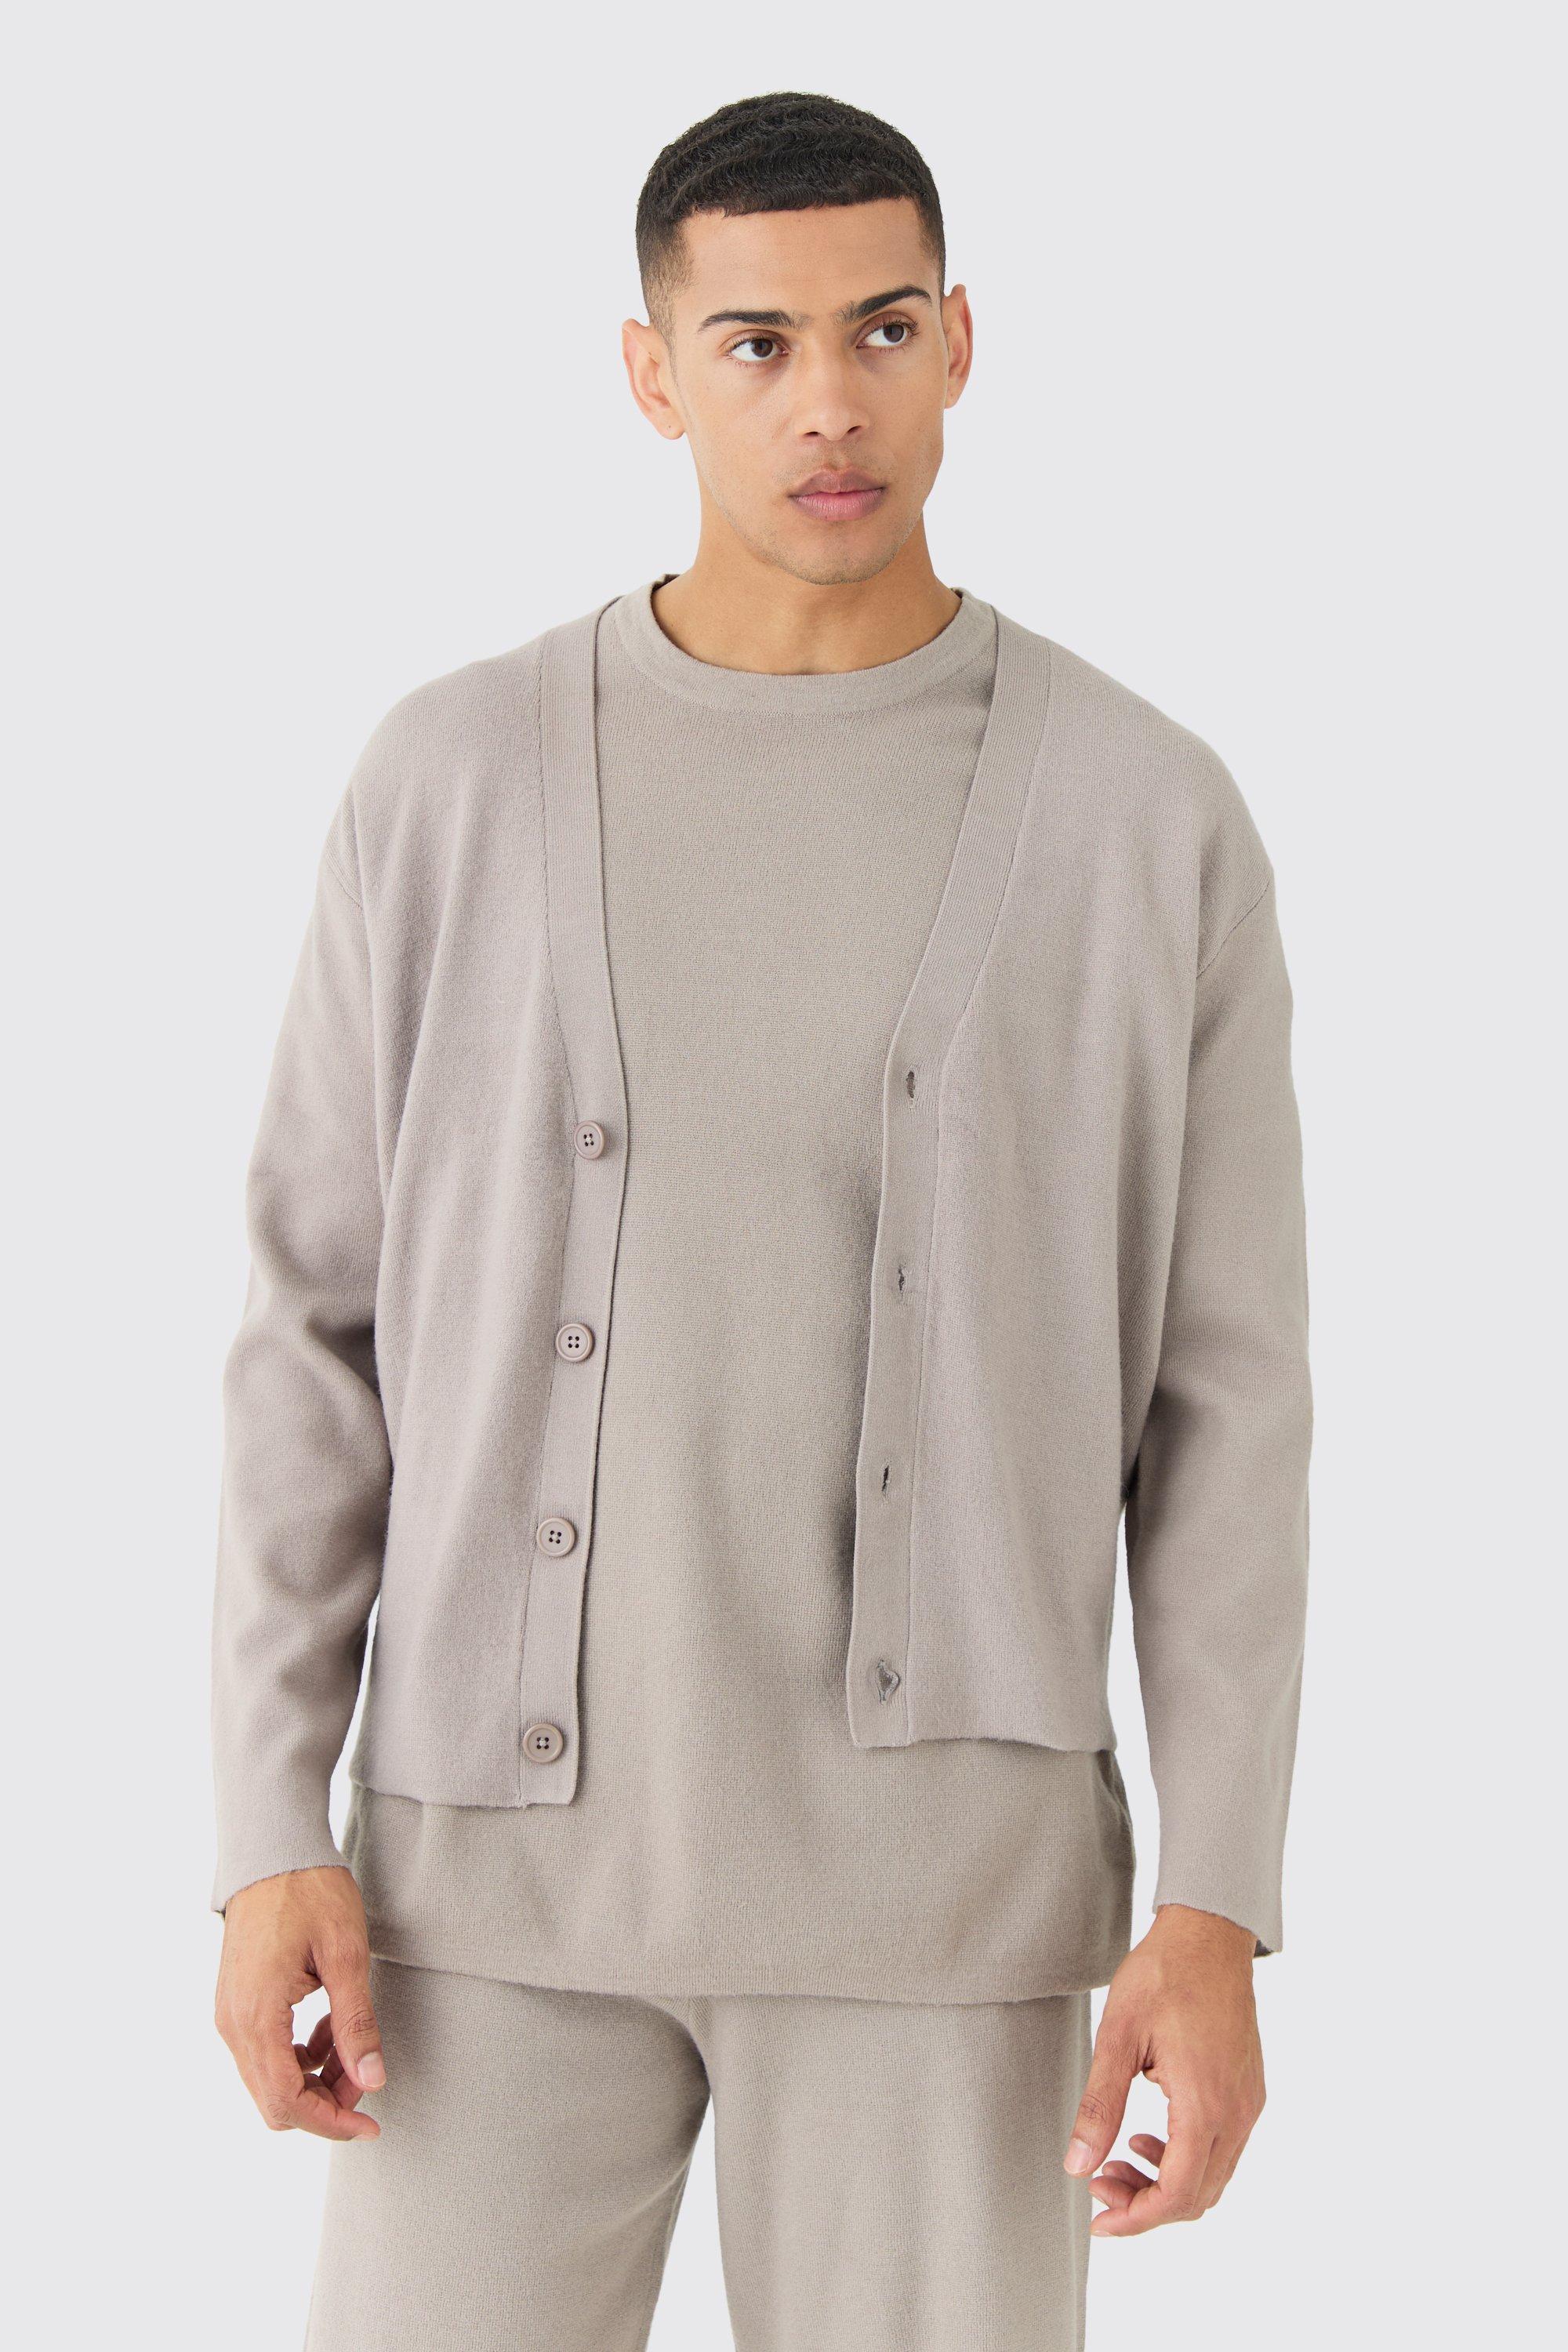 boxy fit knitted cardigan homme - gris - xl, gris